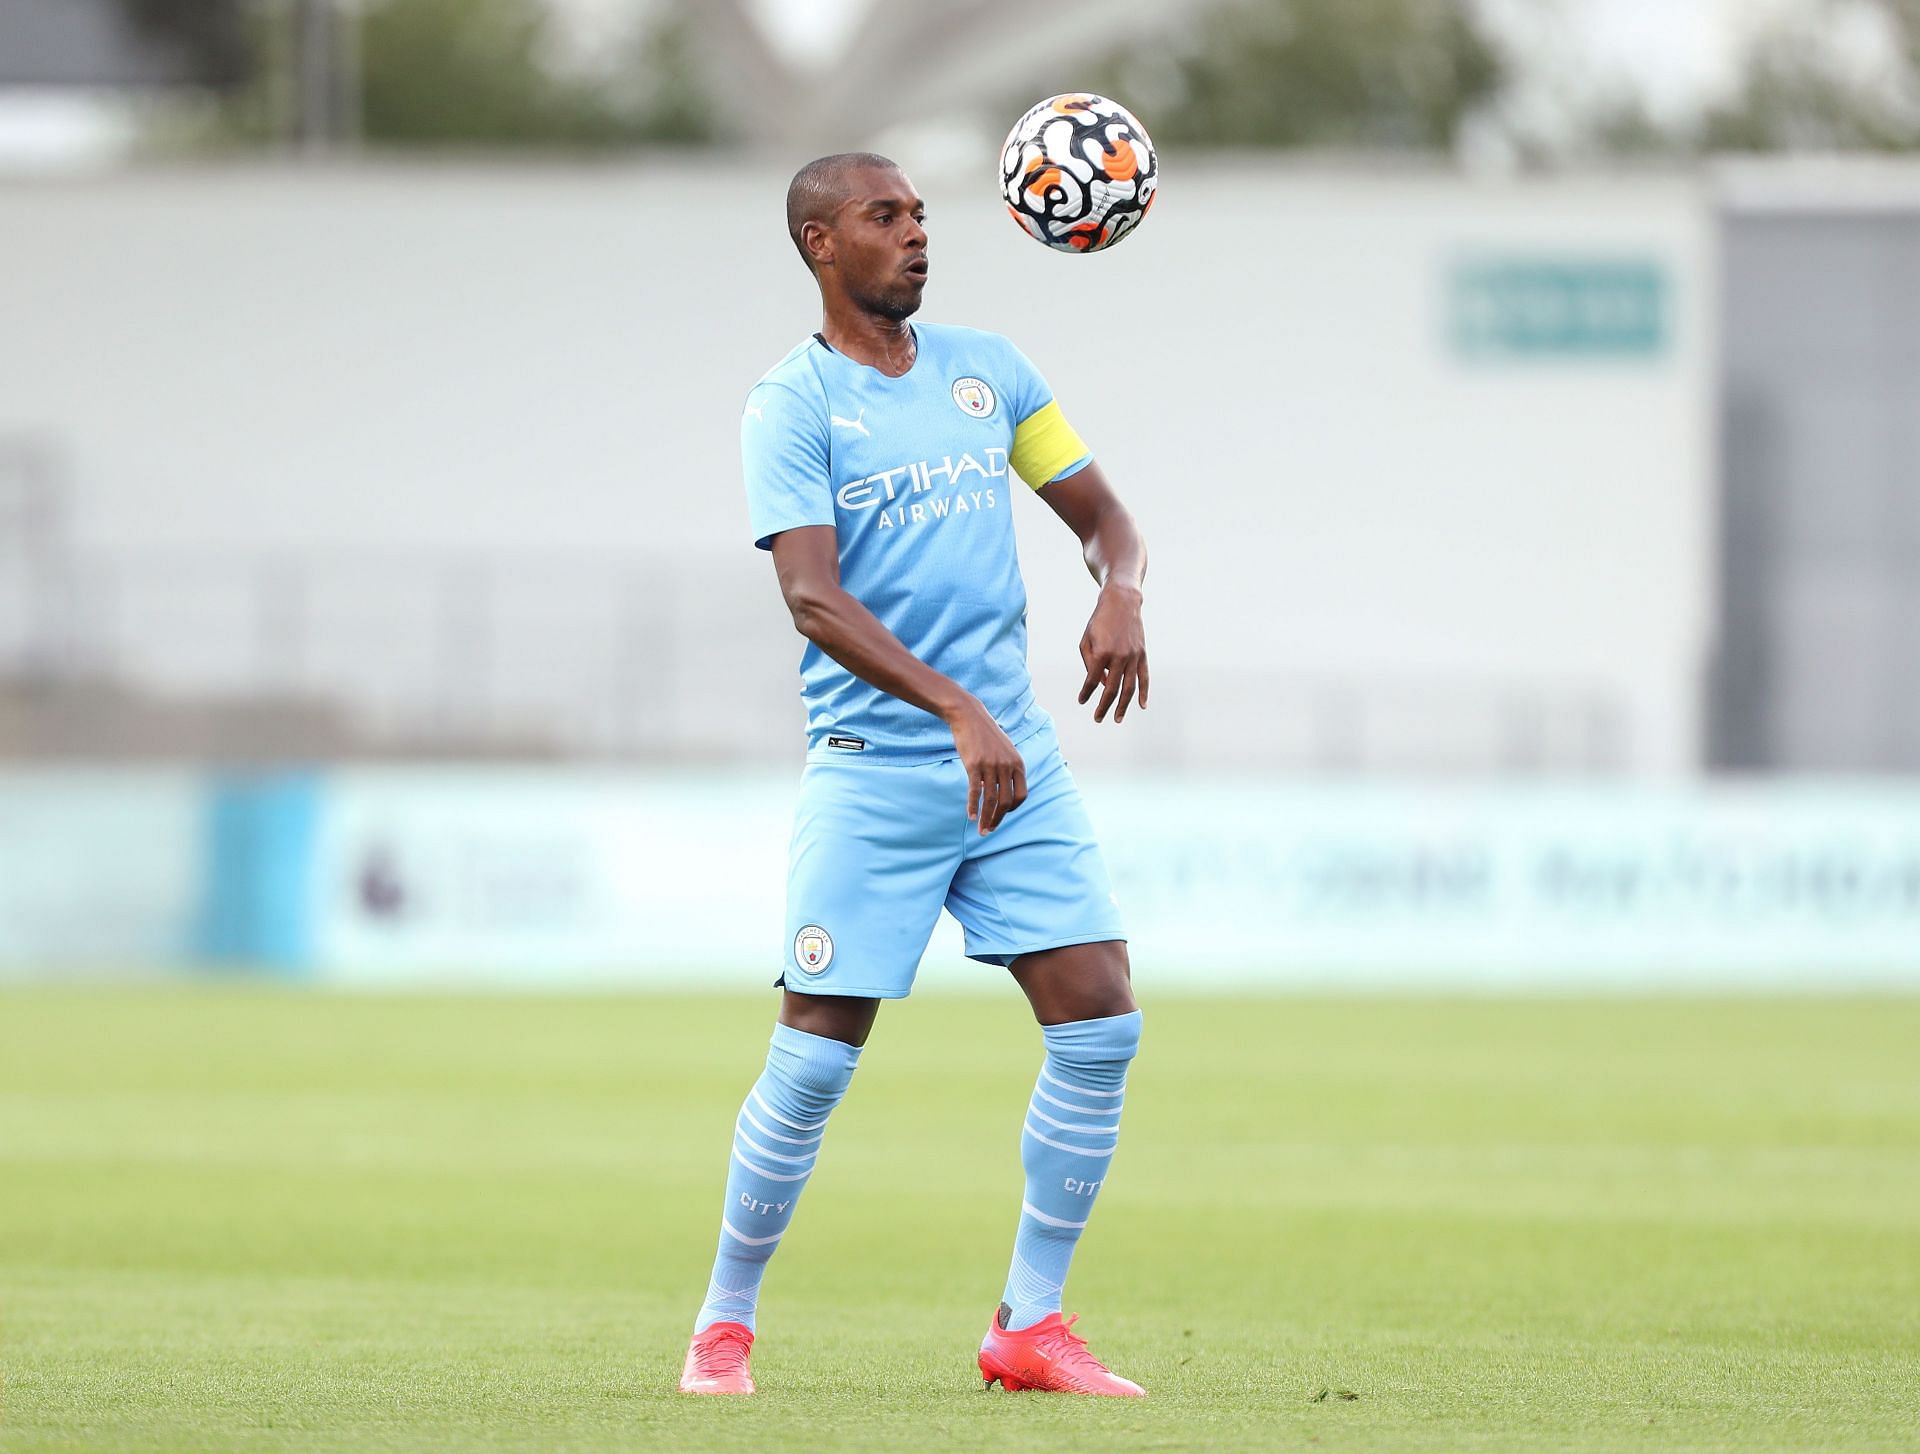 Fernandinho has been at Manchester City for nearly a decade.